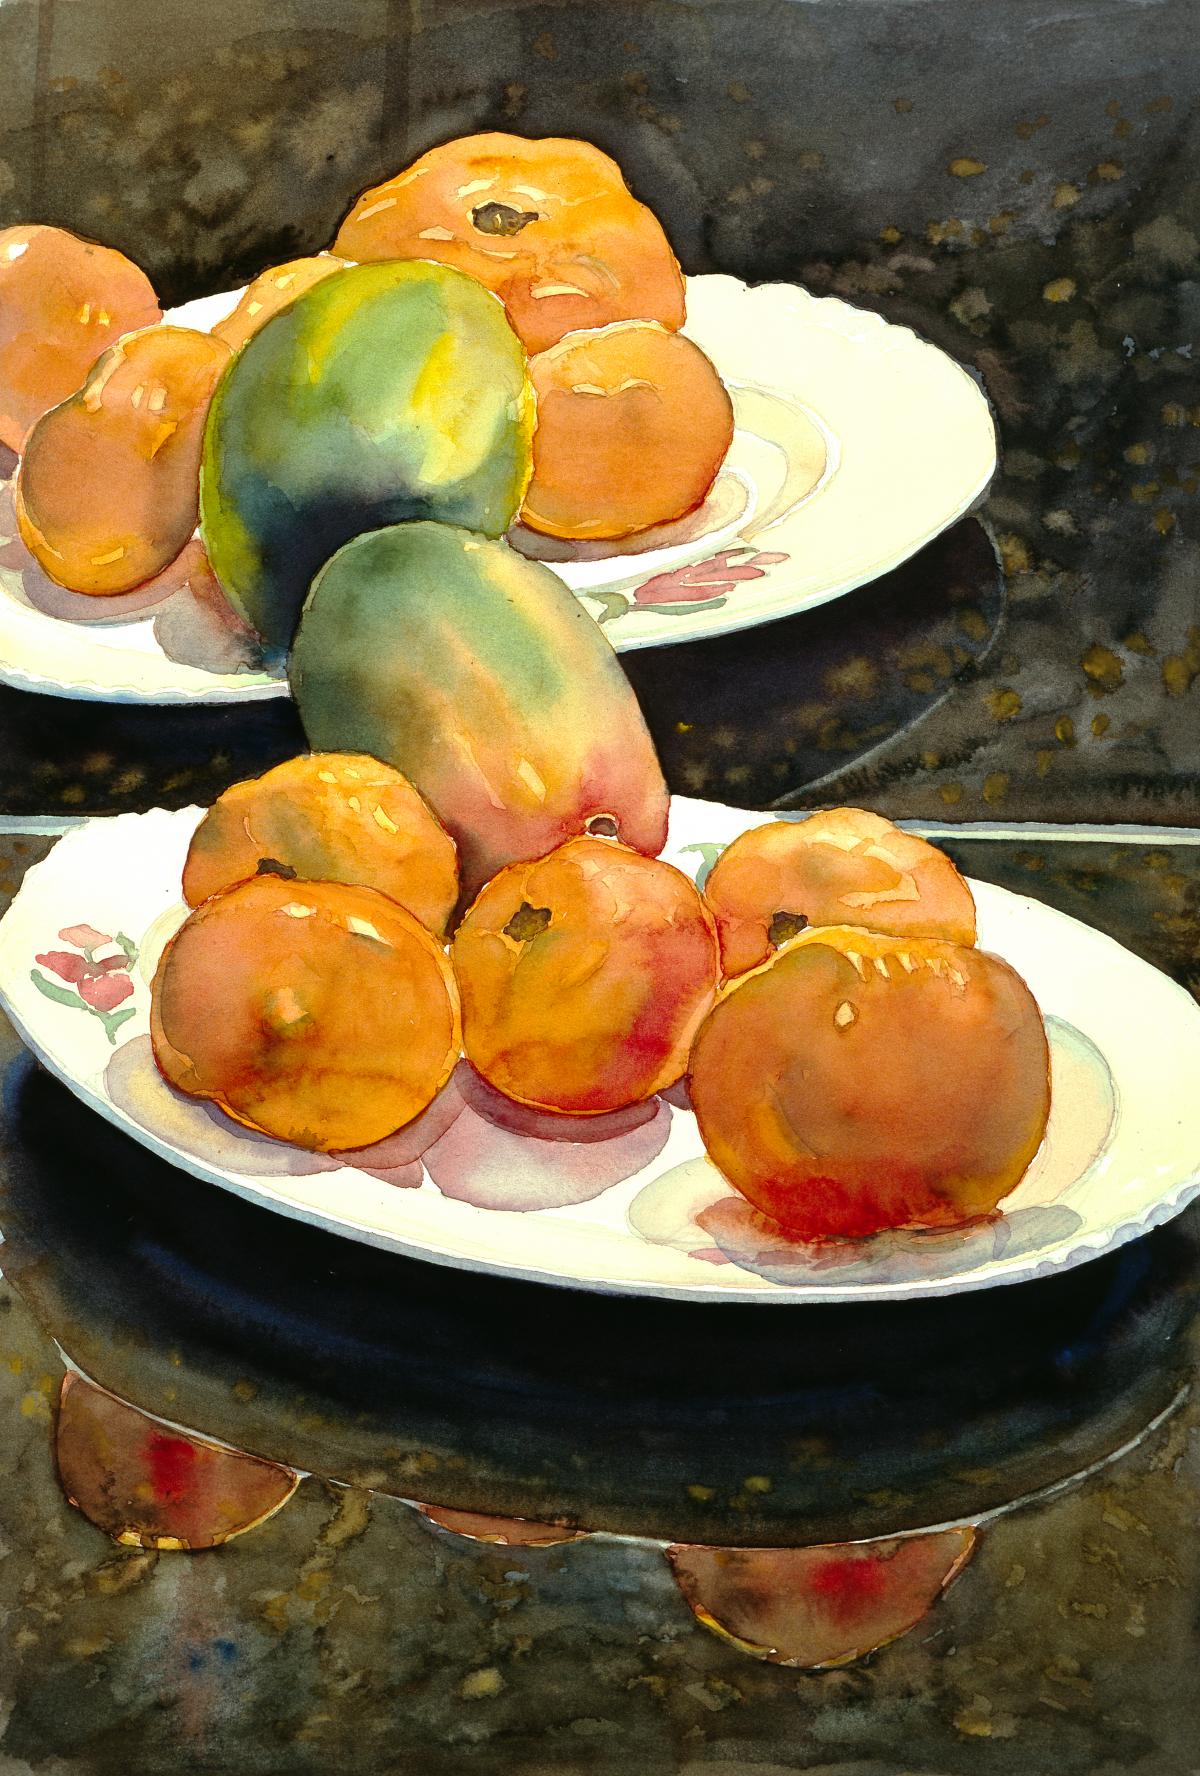 Garden Fruit Reflected - watercolor still life painting by Frank Costantino